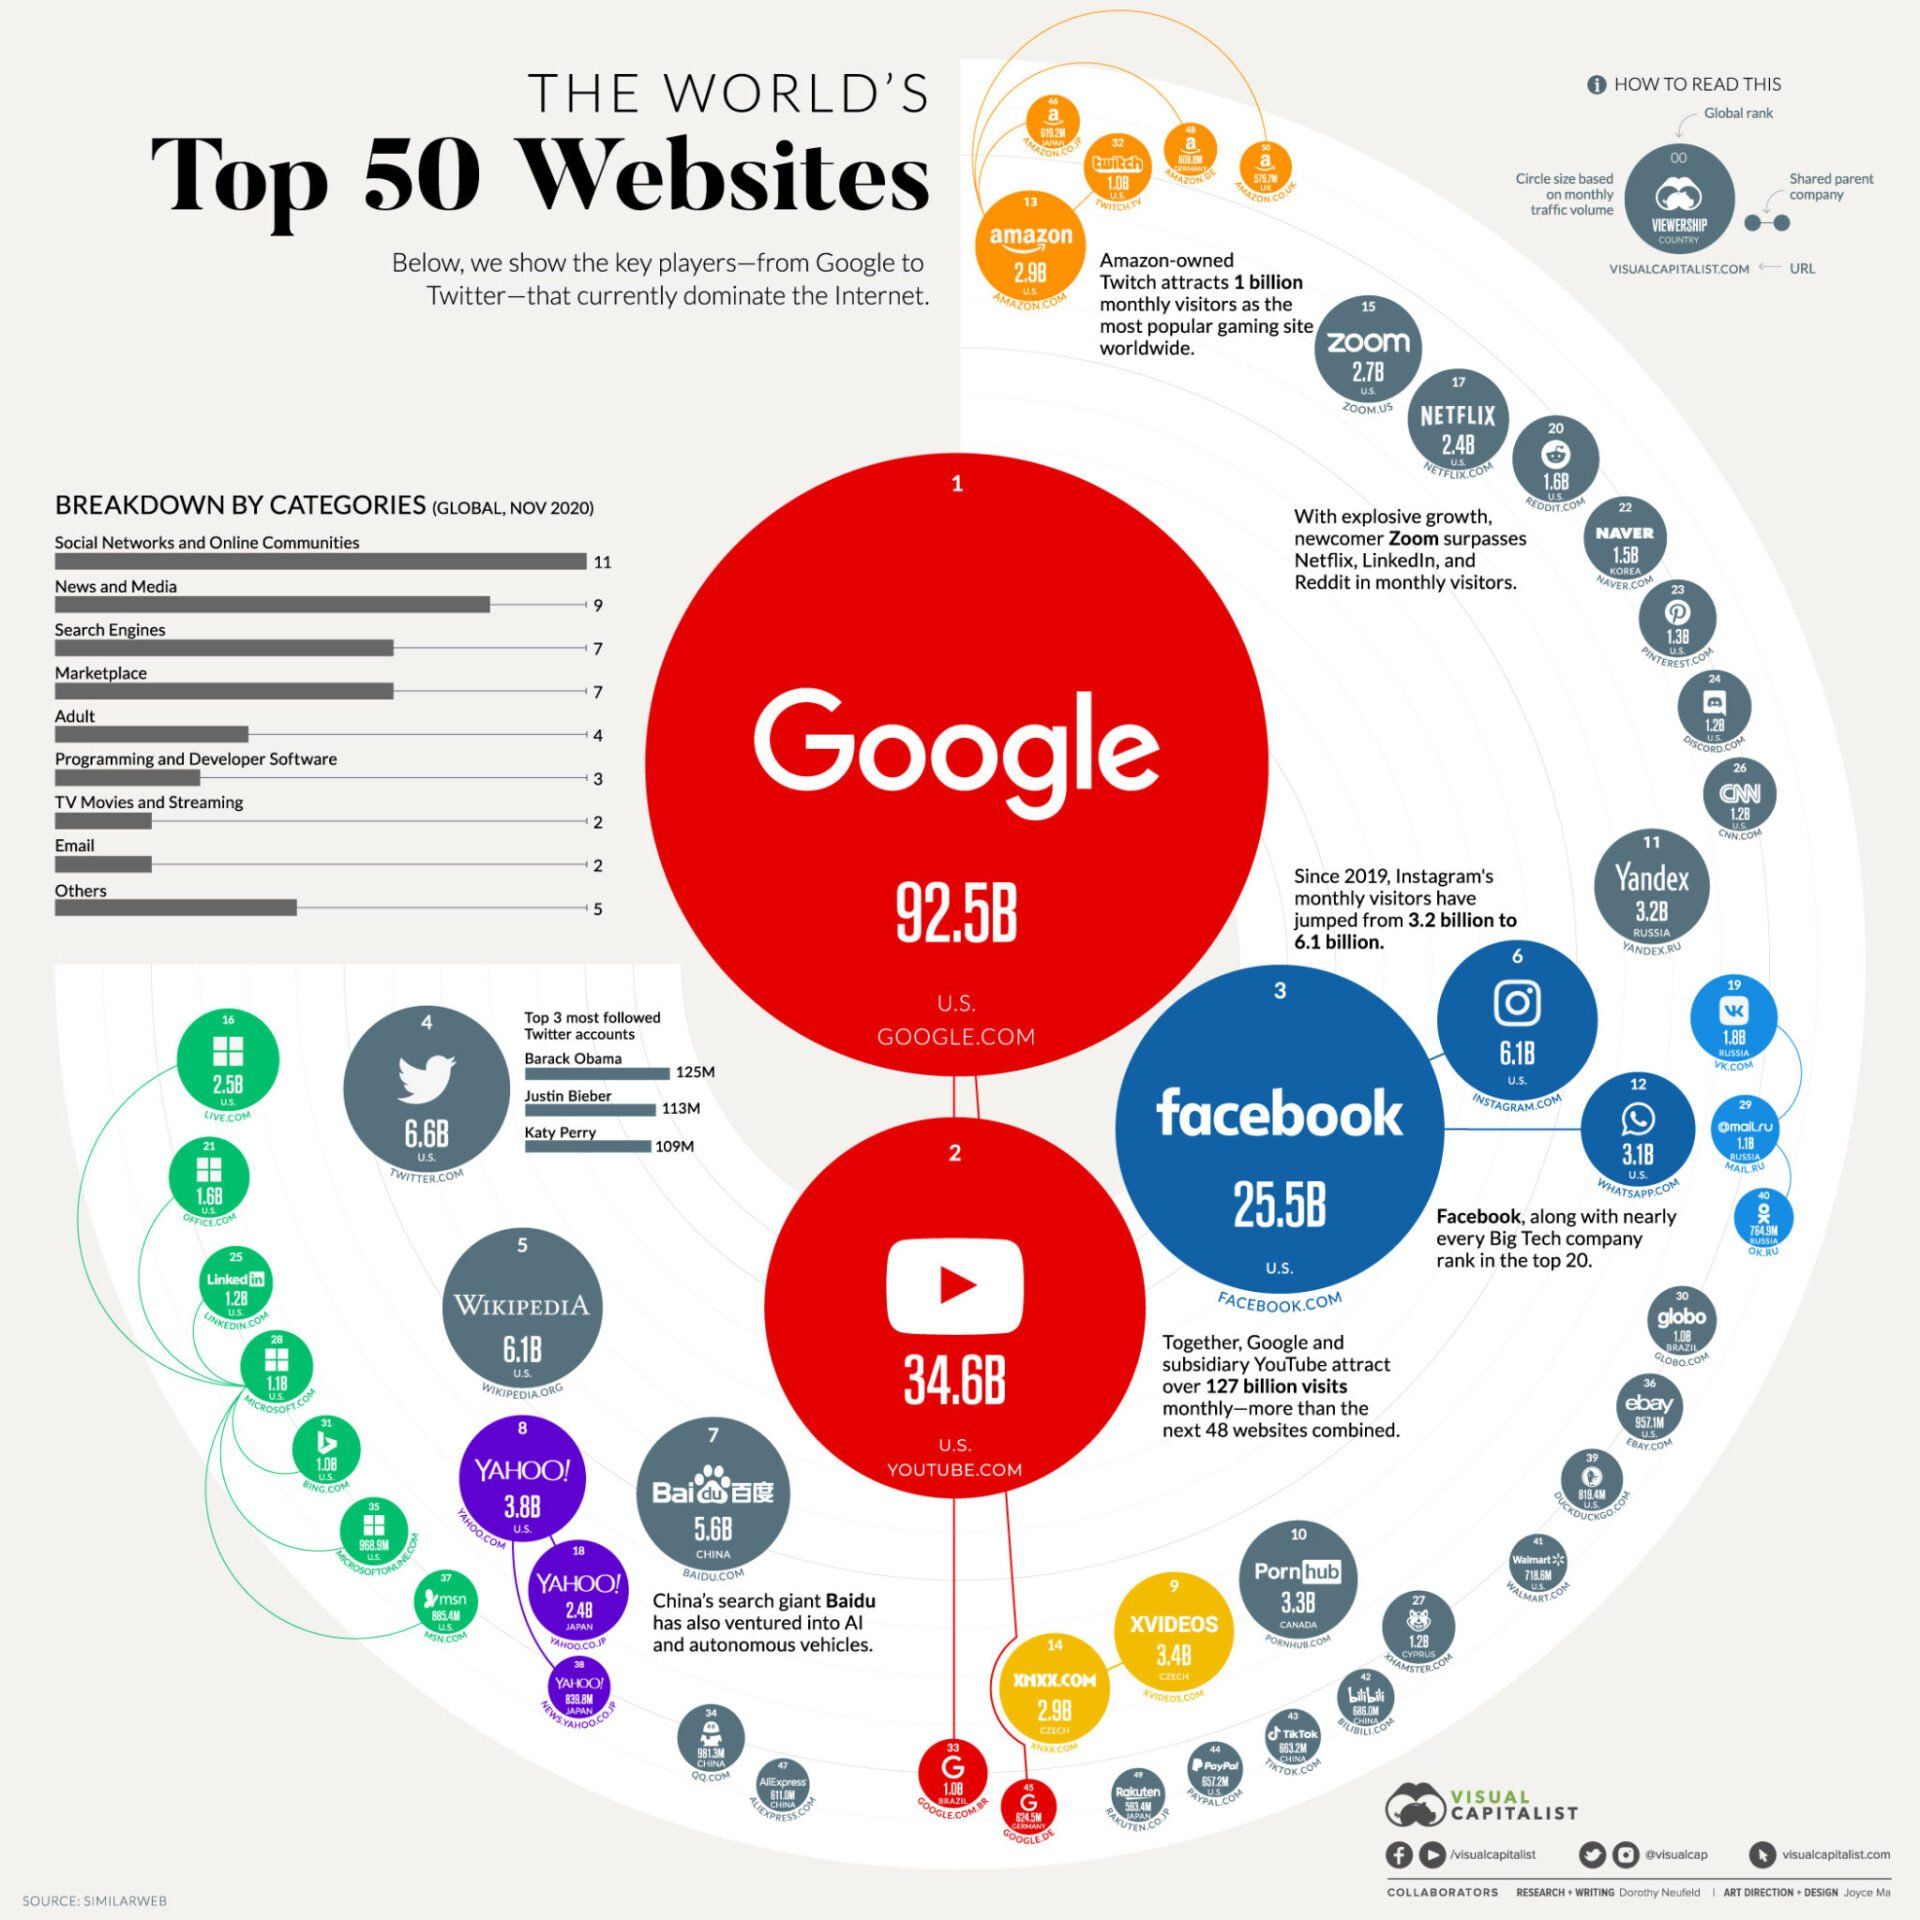 A chart shows the world's top 50 most visited websites, showing the importance of digital marketing to reach consumers on these platforms.